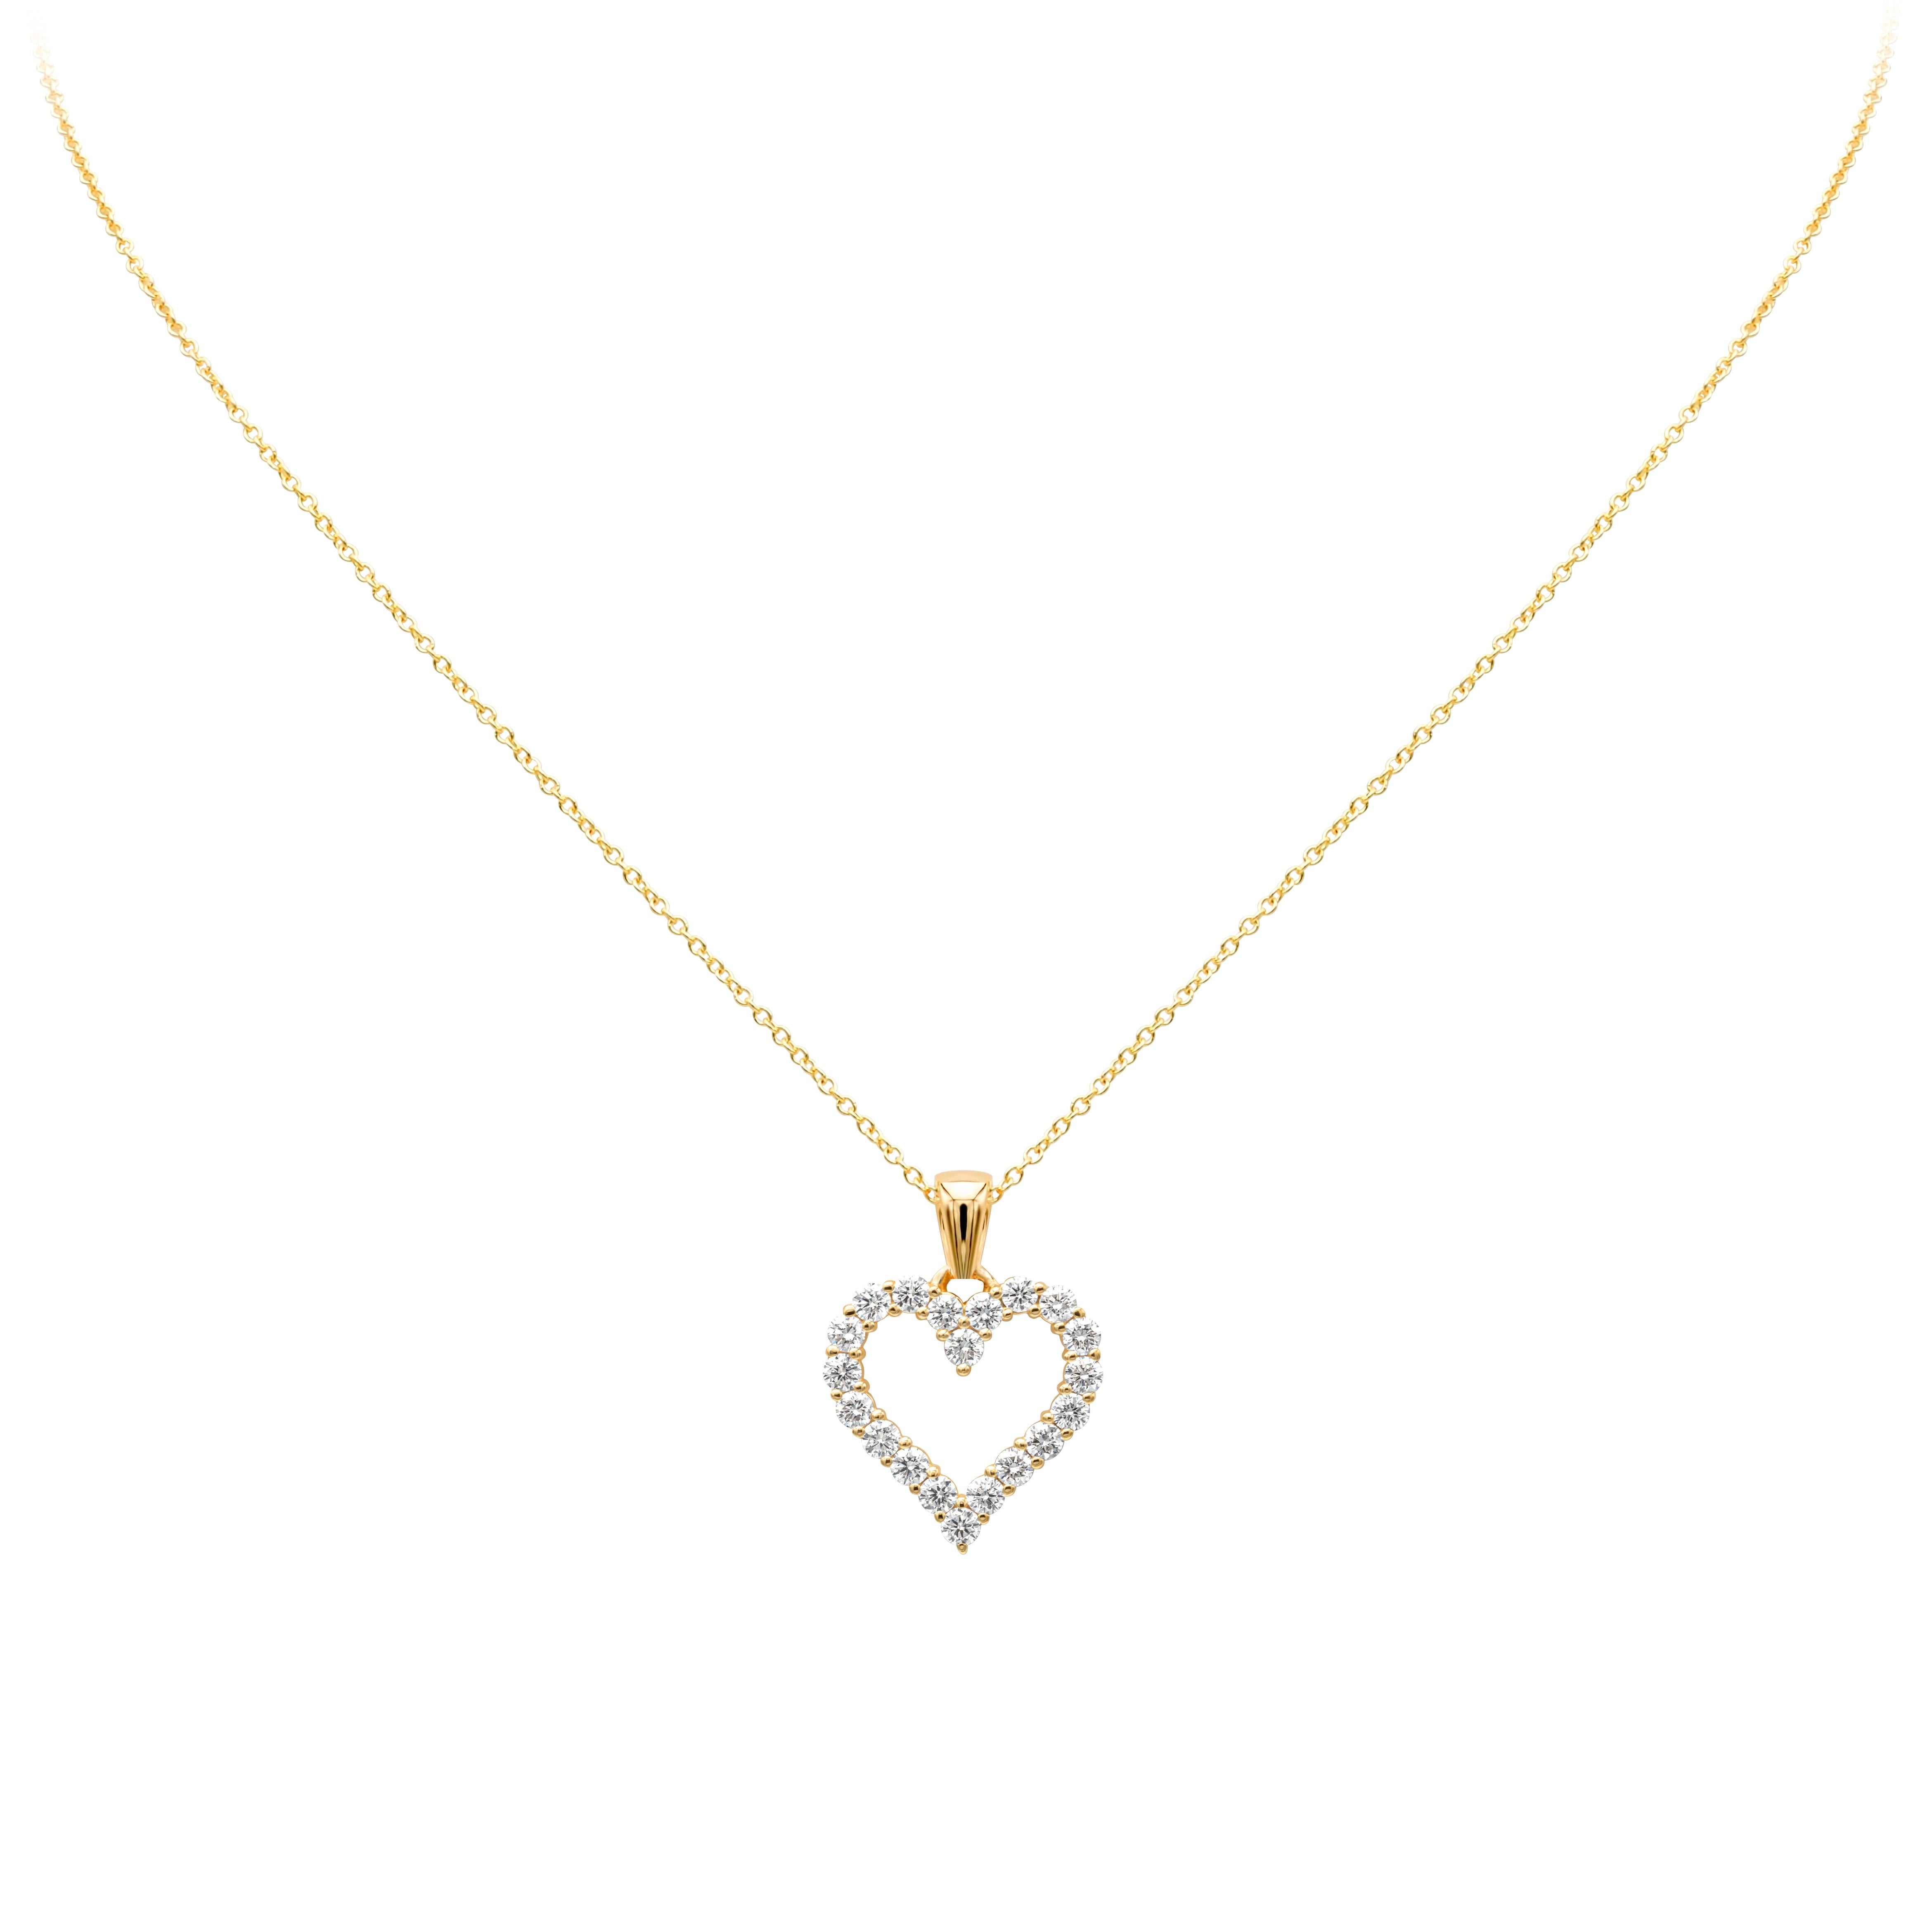 A simple and unique pendant necklace showcasing a row of round brilliant diamonds weighing 0.69 carats total, F color VS-SI1 clarity. Set in an open-work heart shape mounting made in 18K Yellow Gold and shared prong setting. Suspended on an